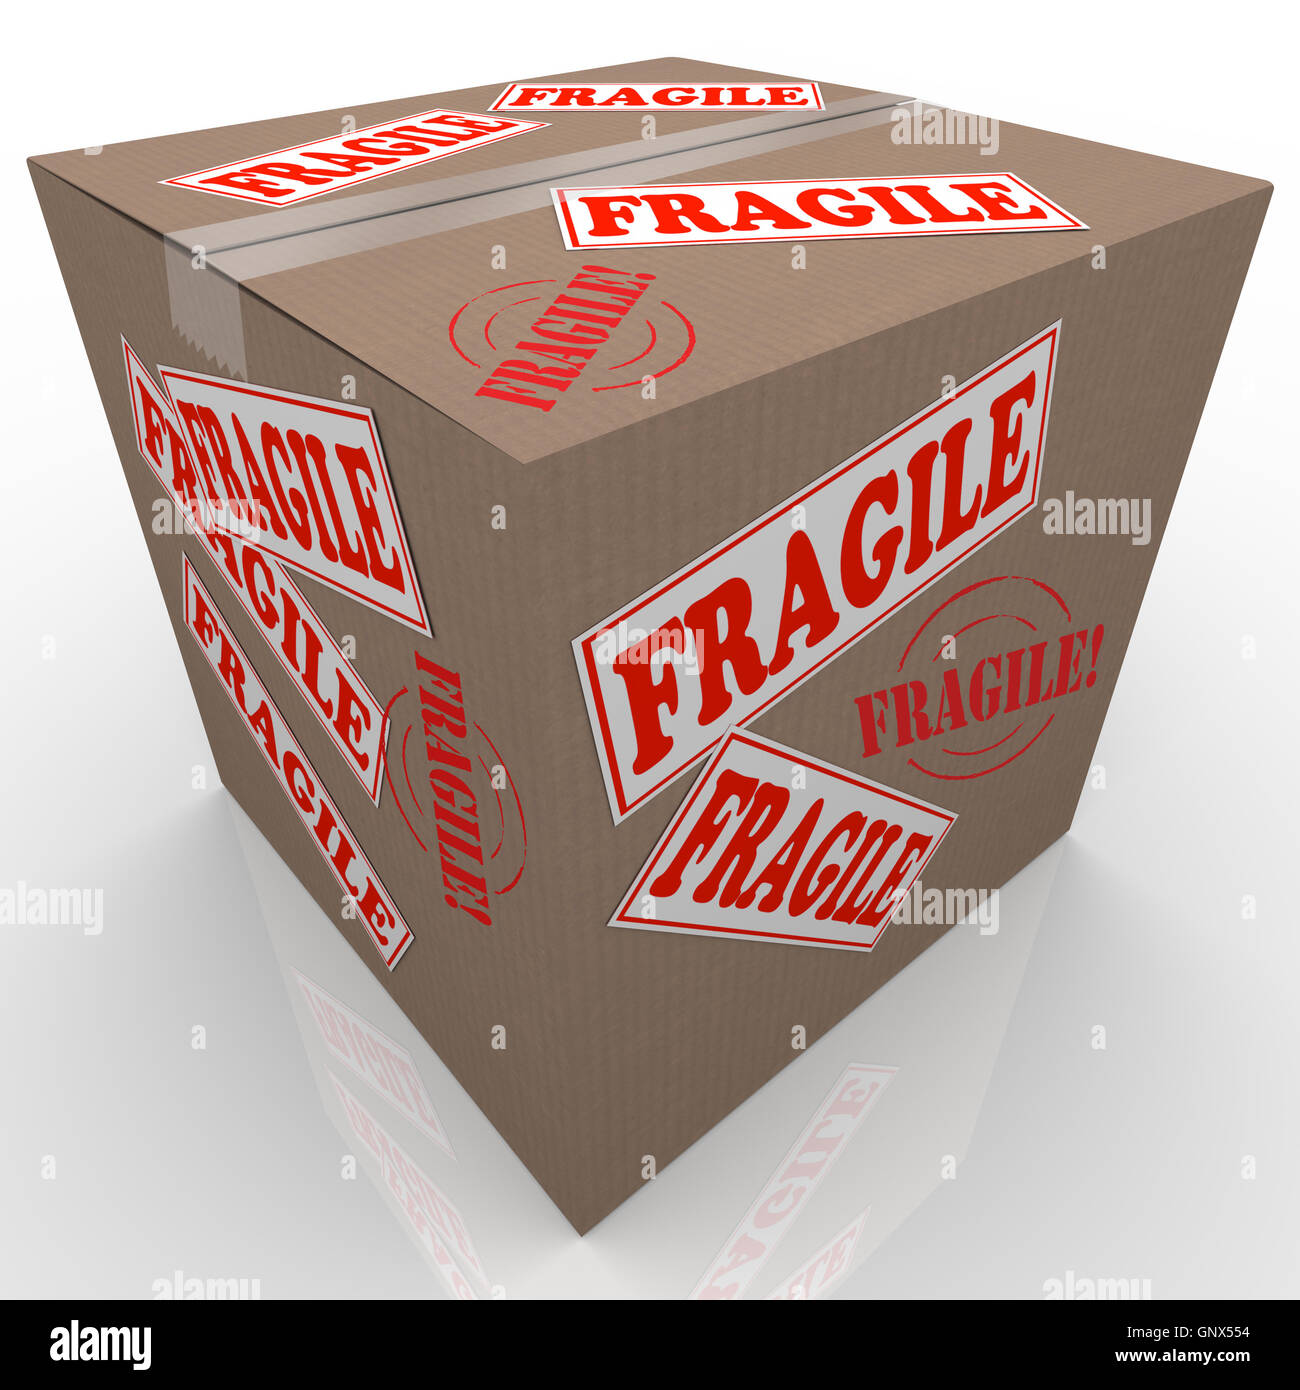 Fragile Cardboard Box Shipment Package Handle with Care Stock Photo